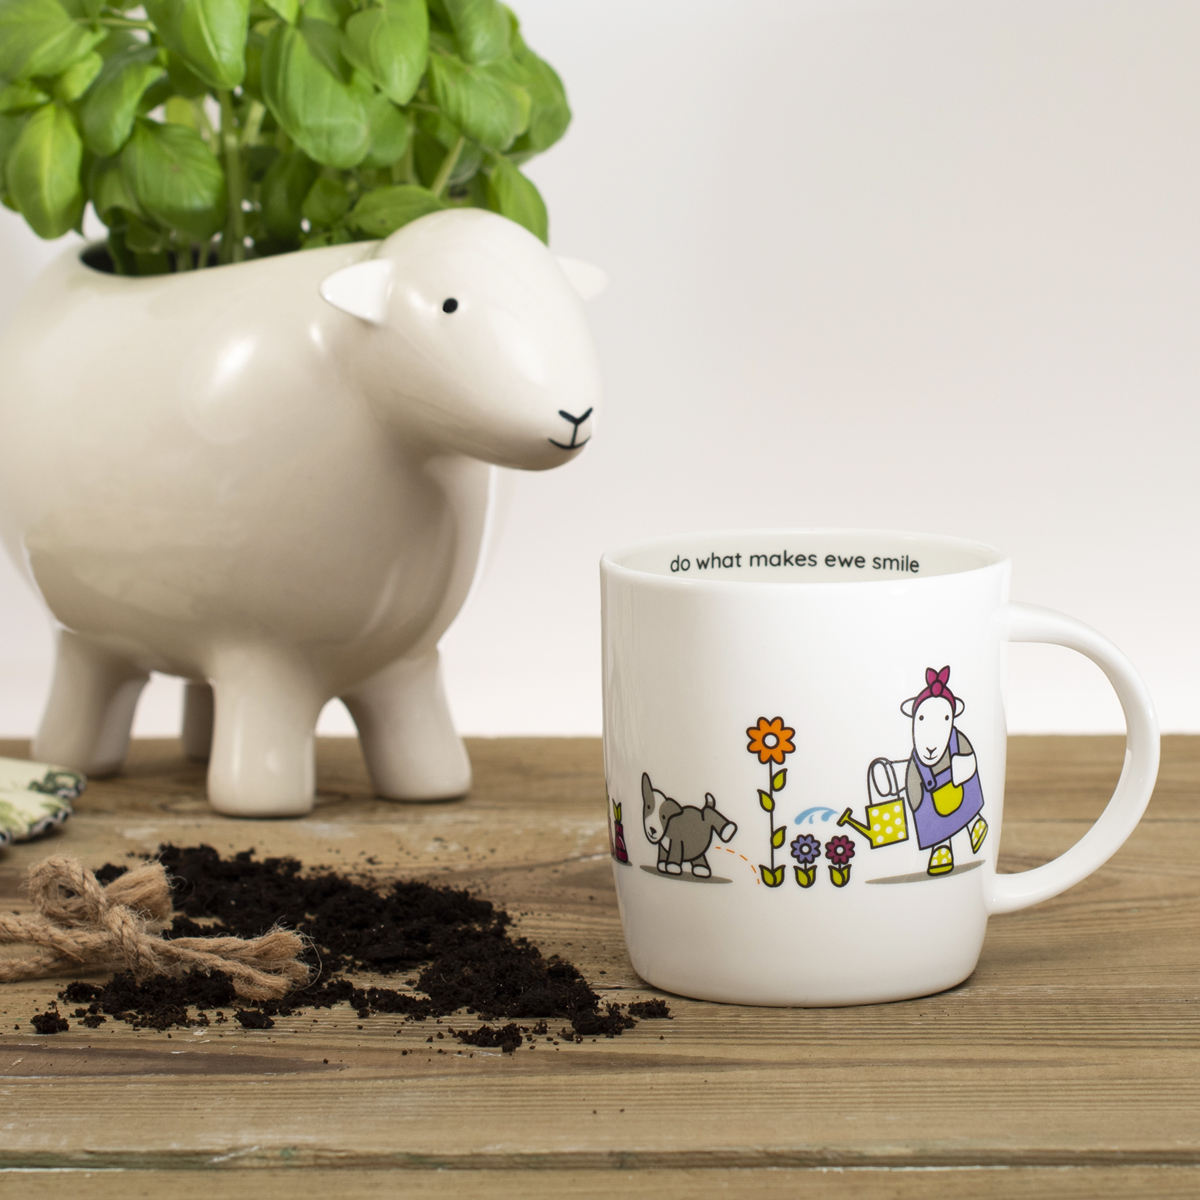 NEW Herdy Lifestyle Mugs!
Join Herdy & Sheppy on their new adventures...

🌷 At the Baa-llotment
🛶 Sheep Dip
🌭 Baa-B-Q-ewe
🚴 Tour De Fleece
🥾 Ram-bling Free
🎸 Baa-stonbury

Which will ewe choose?
herdy.co.uk/kitchen-home/m…

#Herdy #Mugs #Lifestyle #Herdwick #MadeInBritain